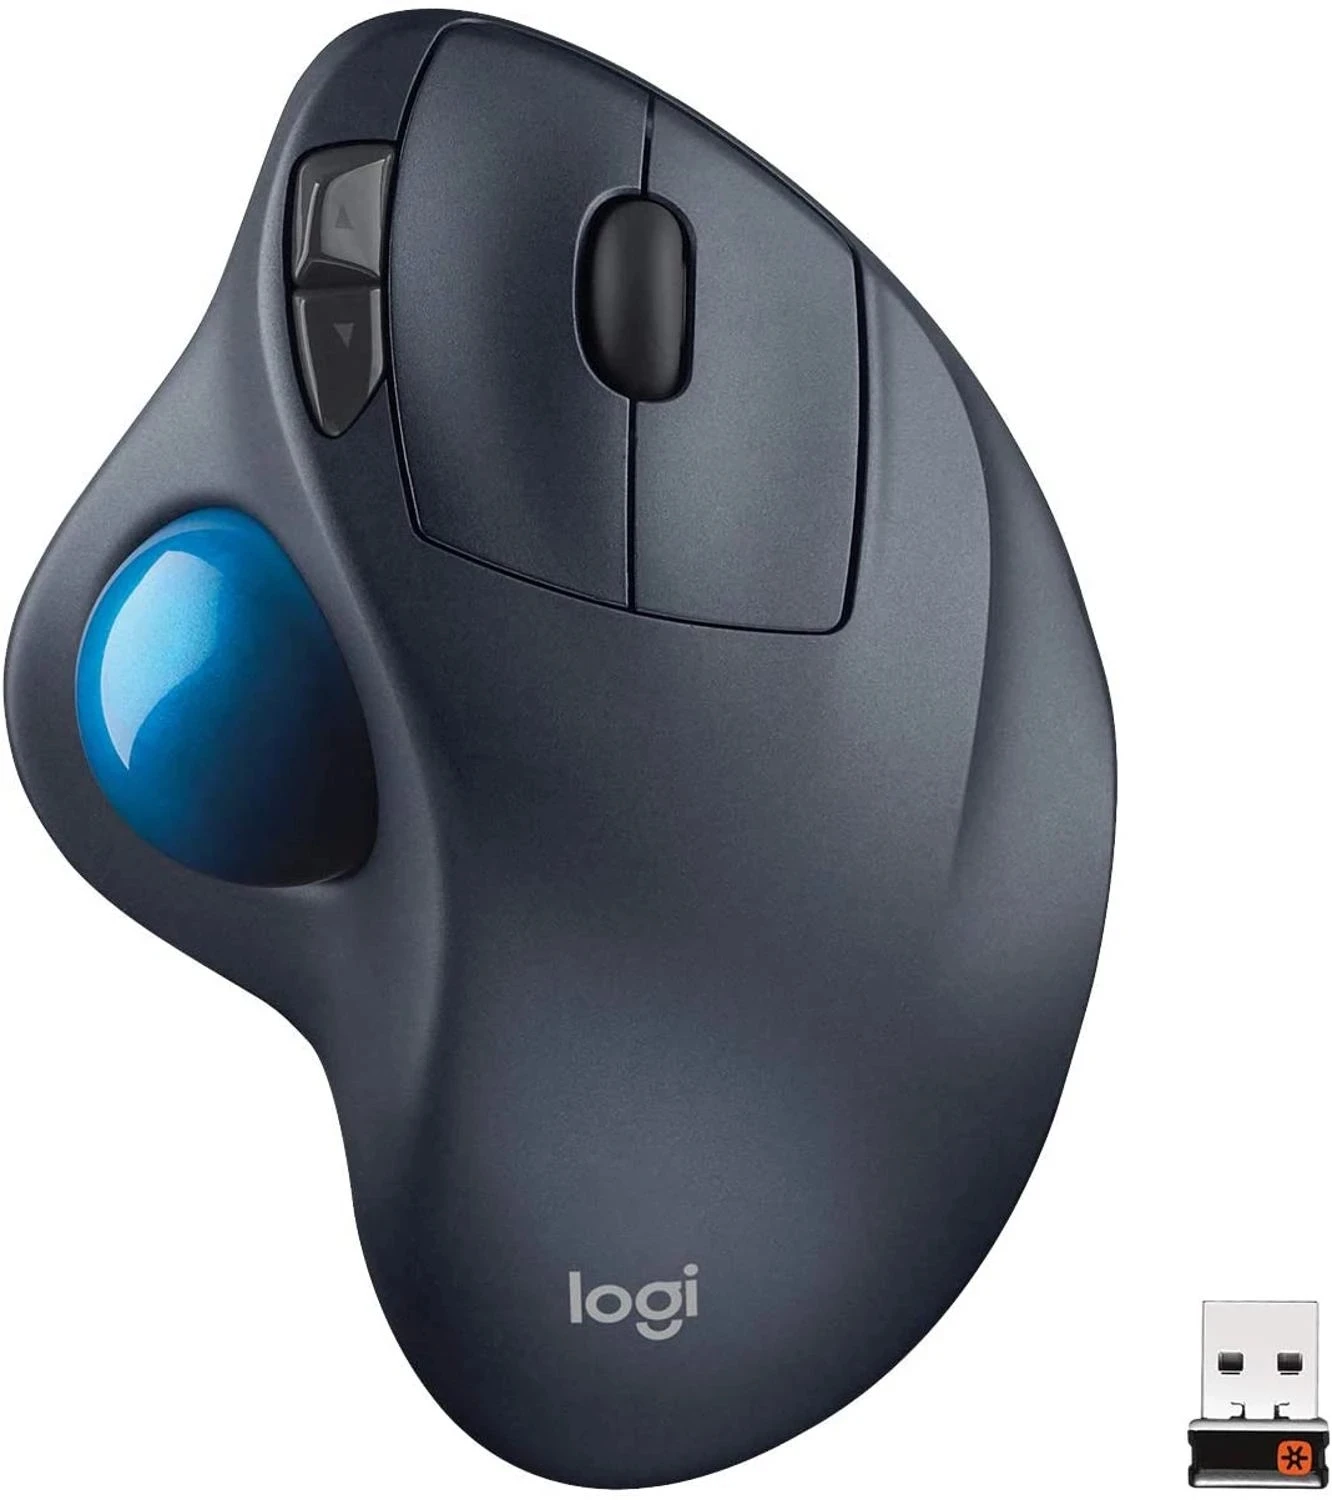 

Logitech M575 Wireless Trackball Mouse – Ergonomic Design with Sculpted Right-Hand Shape, Compatible with Apple Mac and windows